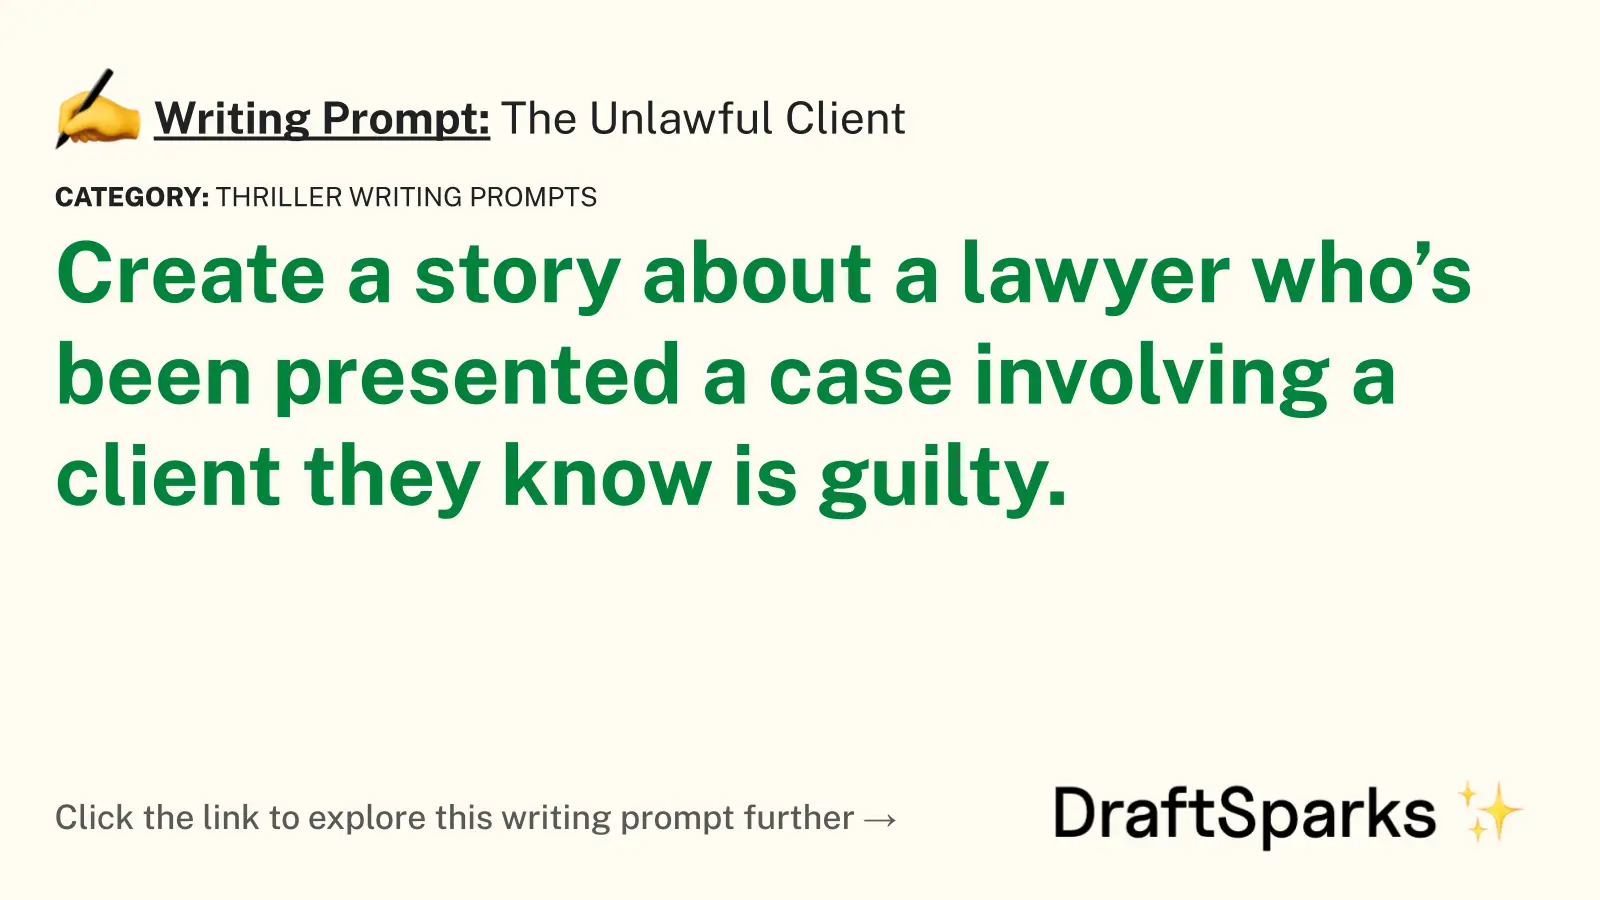 The Unlawful Client